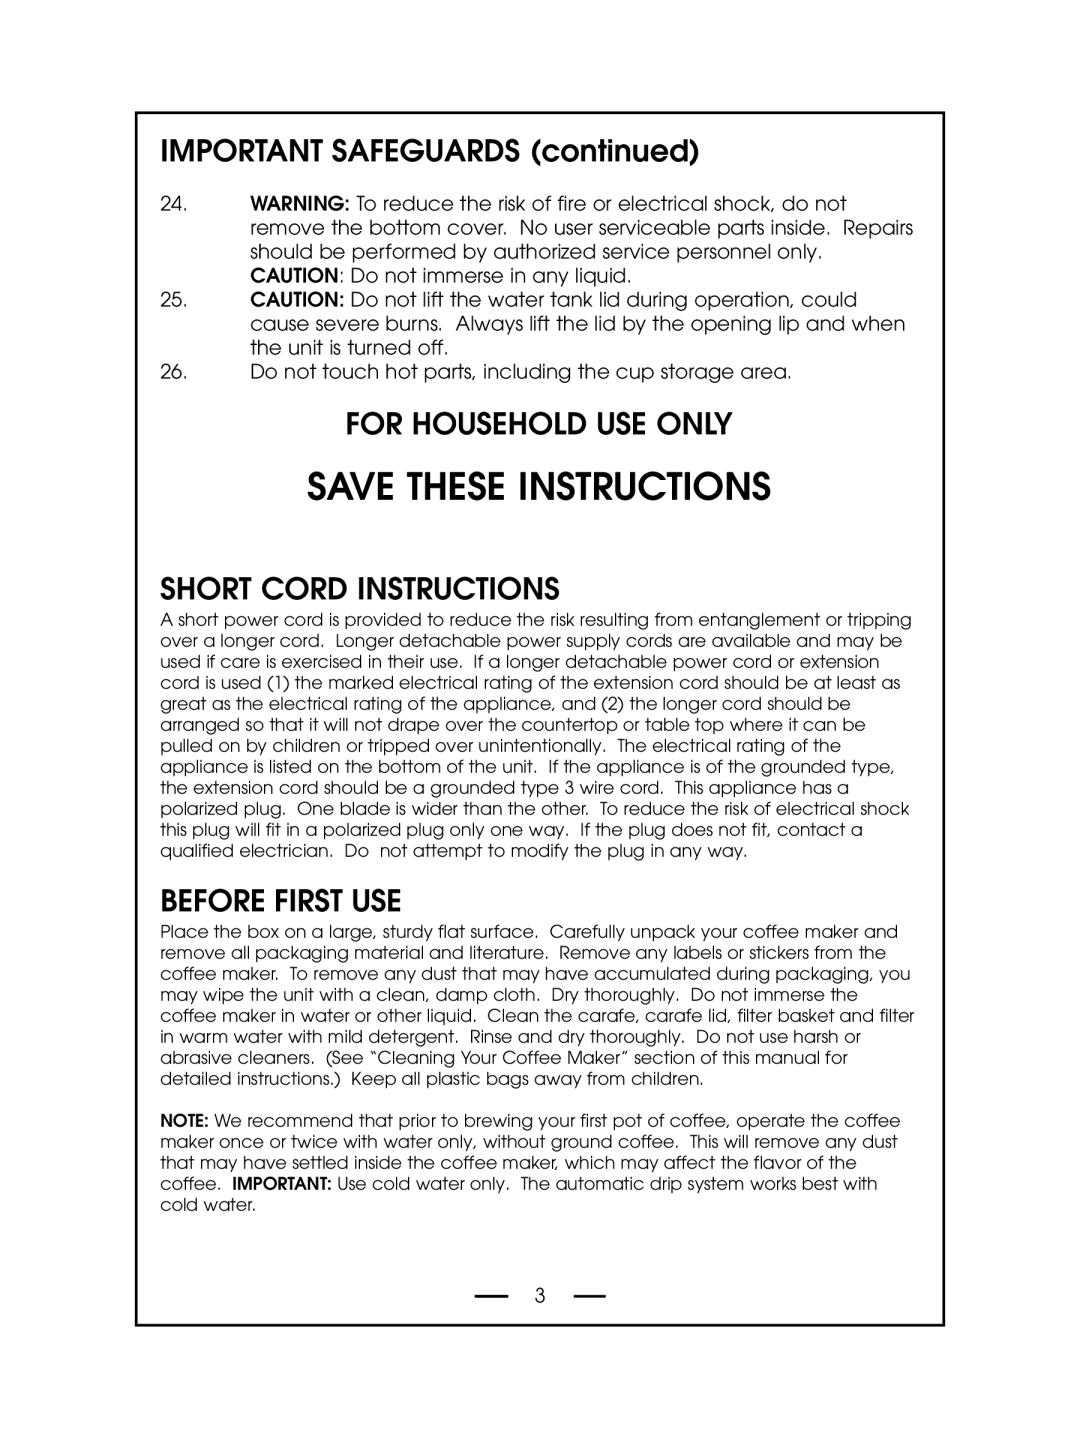 DeLonghi DCM485 Save These Instructions, IMPORTANT SAFEGUARDS continued, For Household Use Only, Short Cord Instructions 